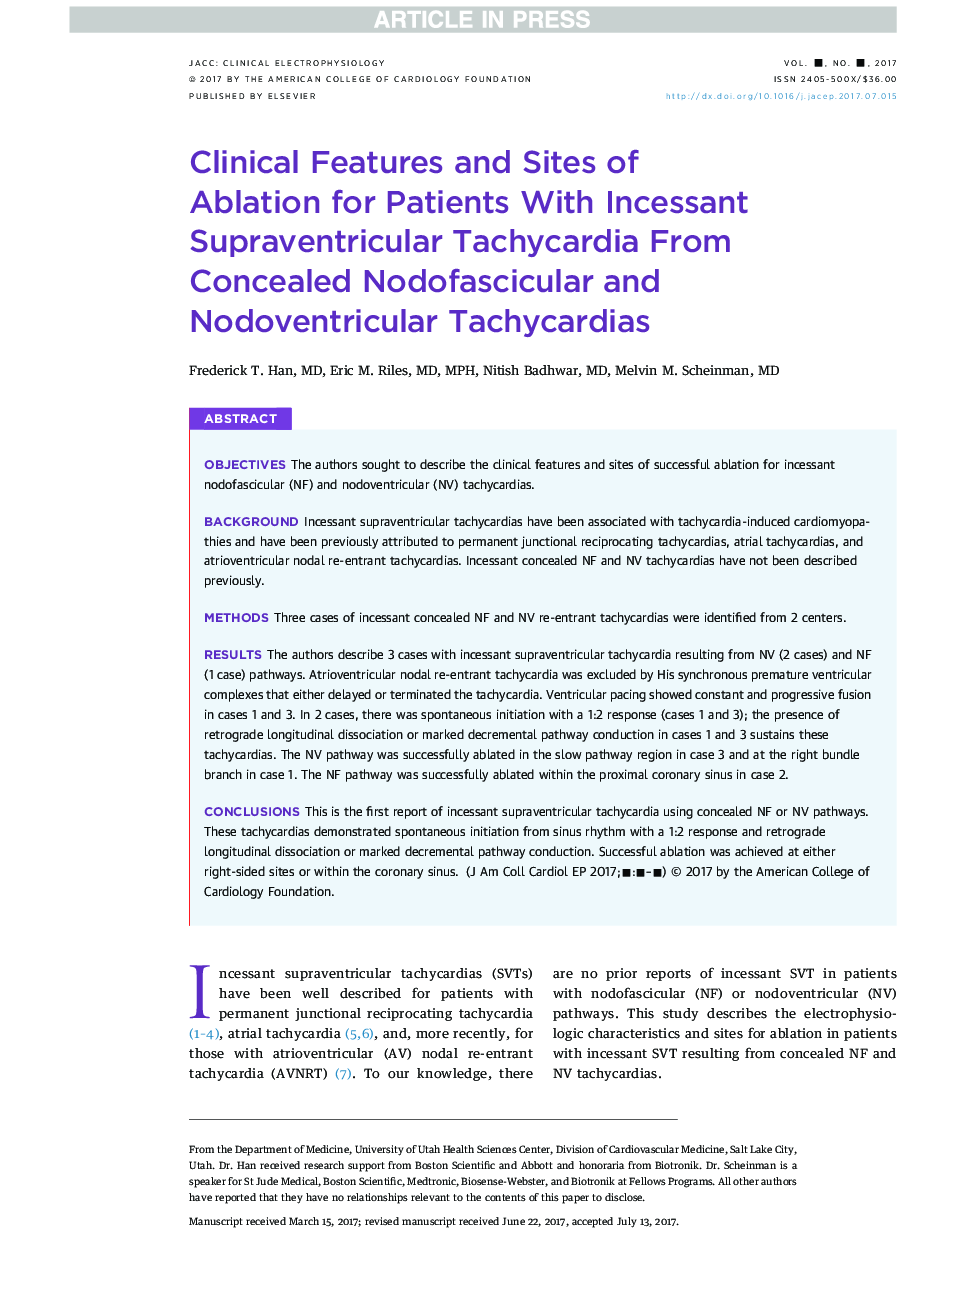 Clinical Features and Sites of AblationÂ forÂ PatientsÂ With IncessantÂ Supraventricular Tachycardia FromÂ ConcealedÂ Nodofascicular and Nodoventricular Tachycardias